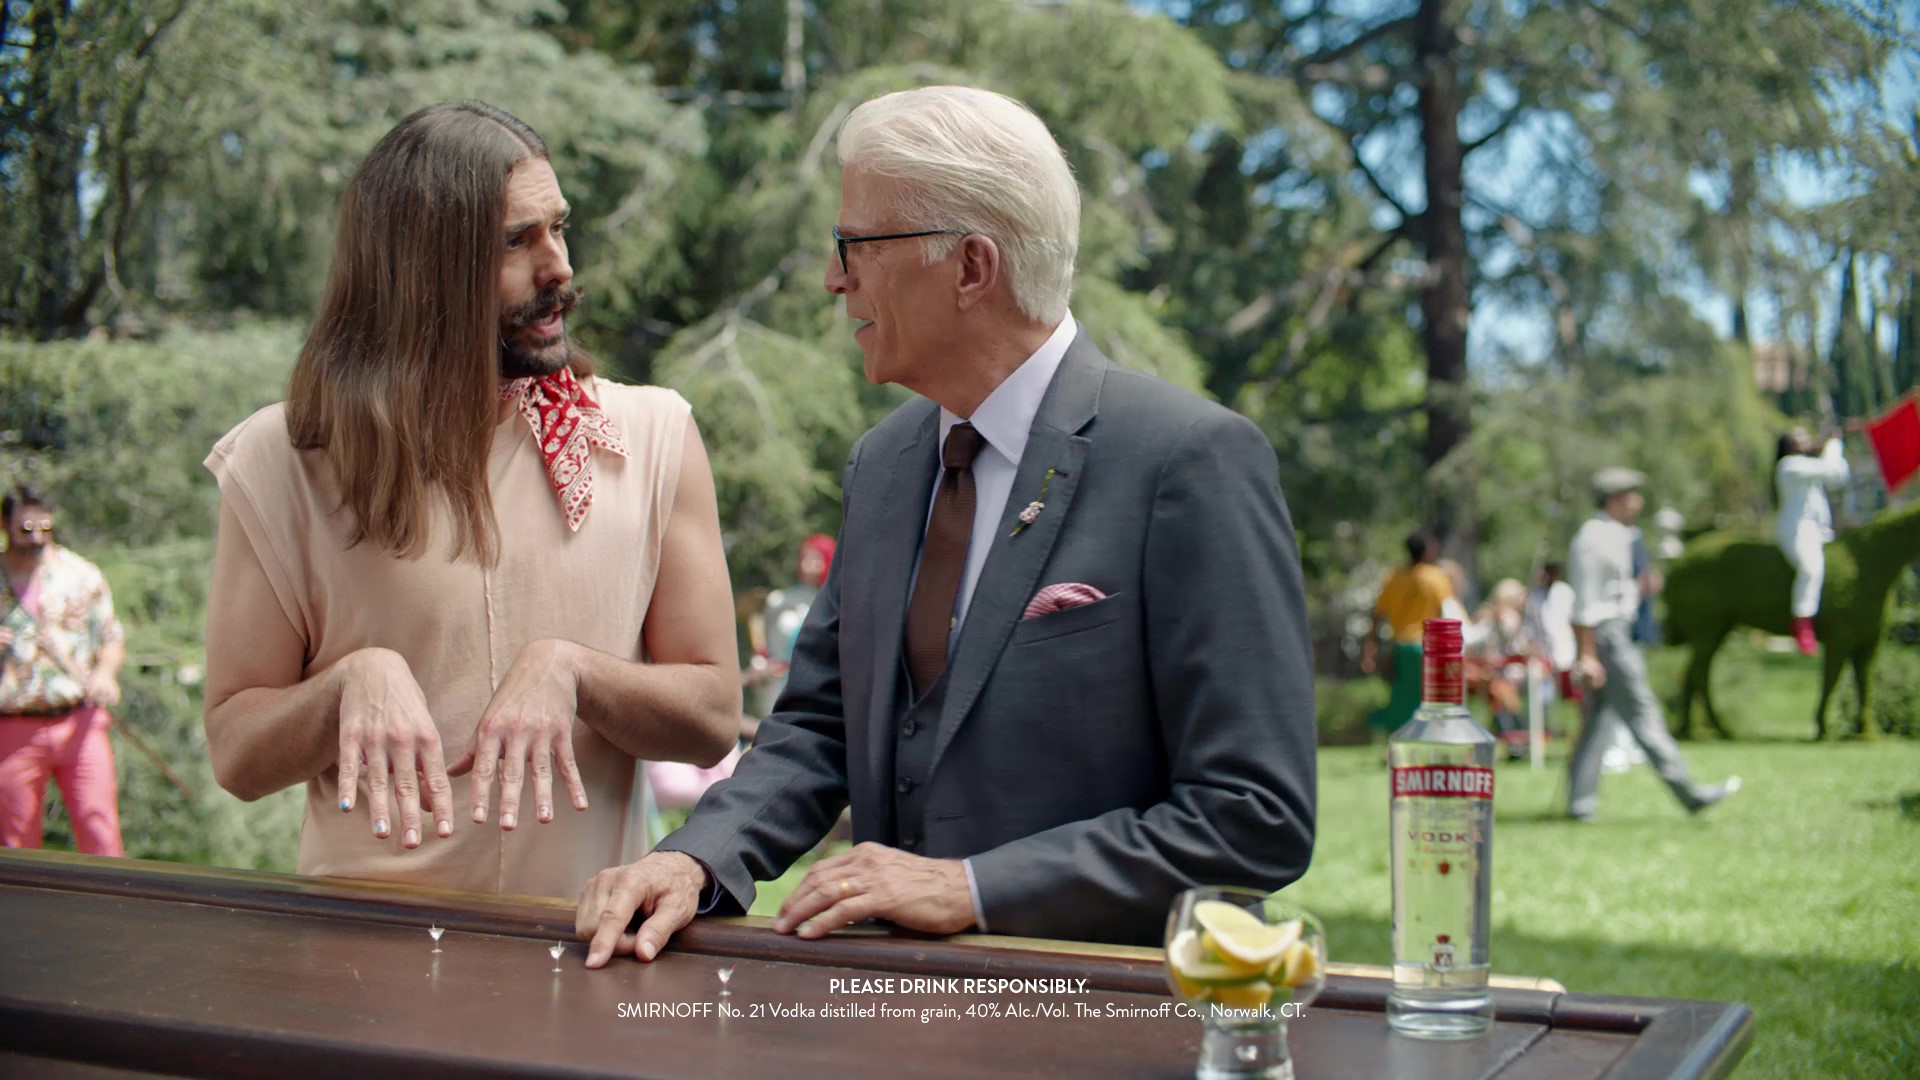 Jonathan Van Ness Joins Ted Danson To Show You Don’t Need A Lot To Have Good Time on the Set of SMIRNOFF’s New Fun% Campaign Shoot